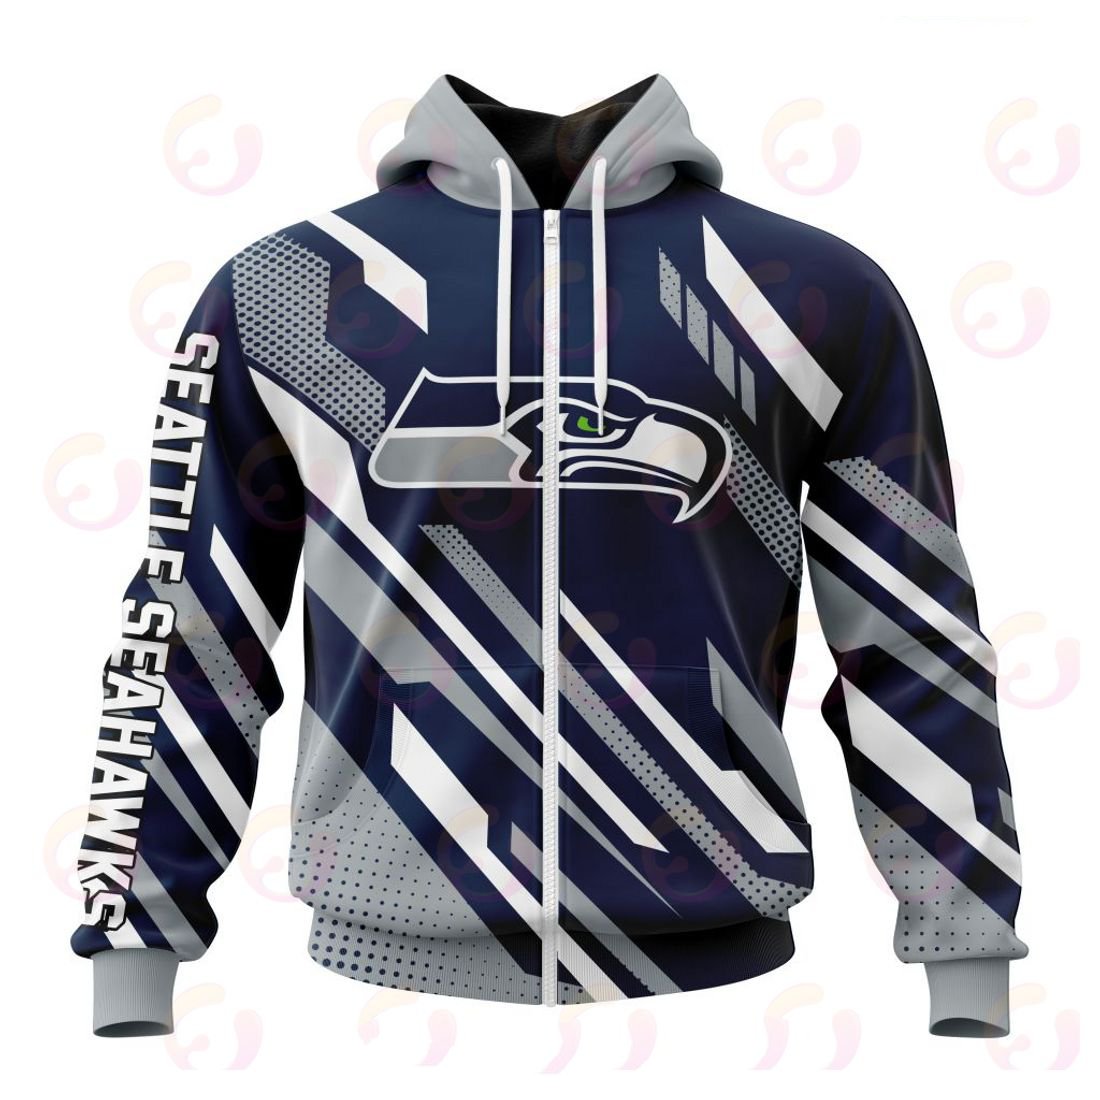 SEATTLE SEAHAWKS 3D HOODIE SPECIAL MOTOCROSS CONCEPT